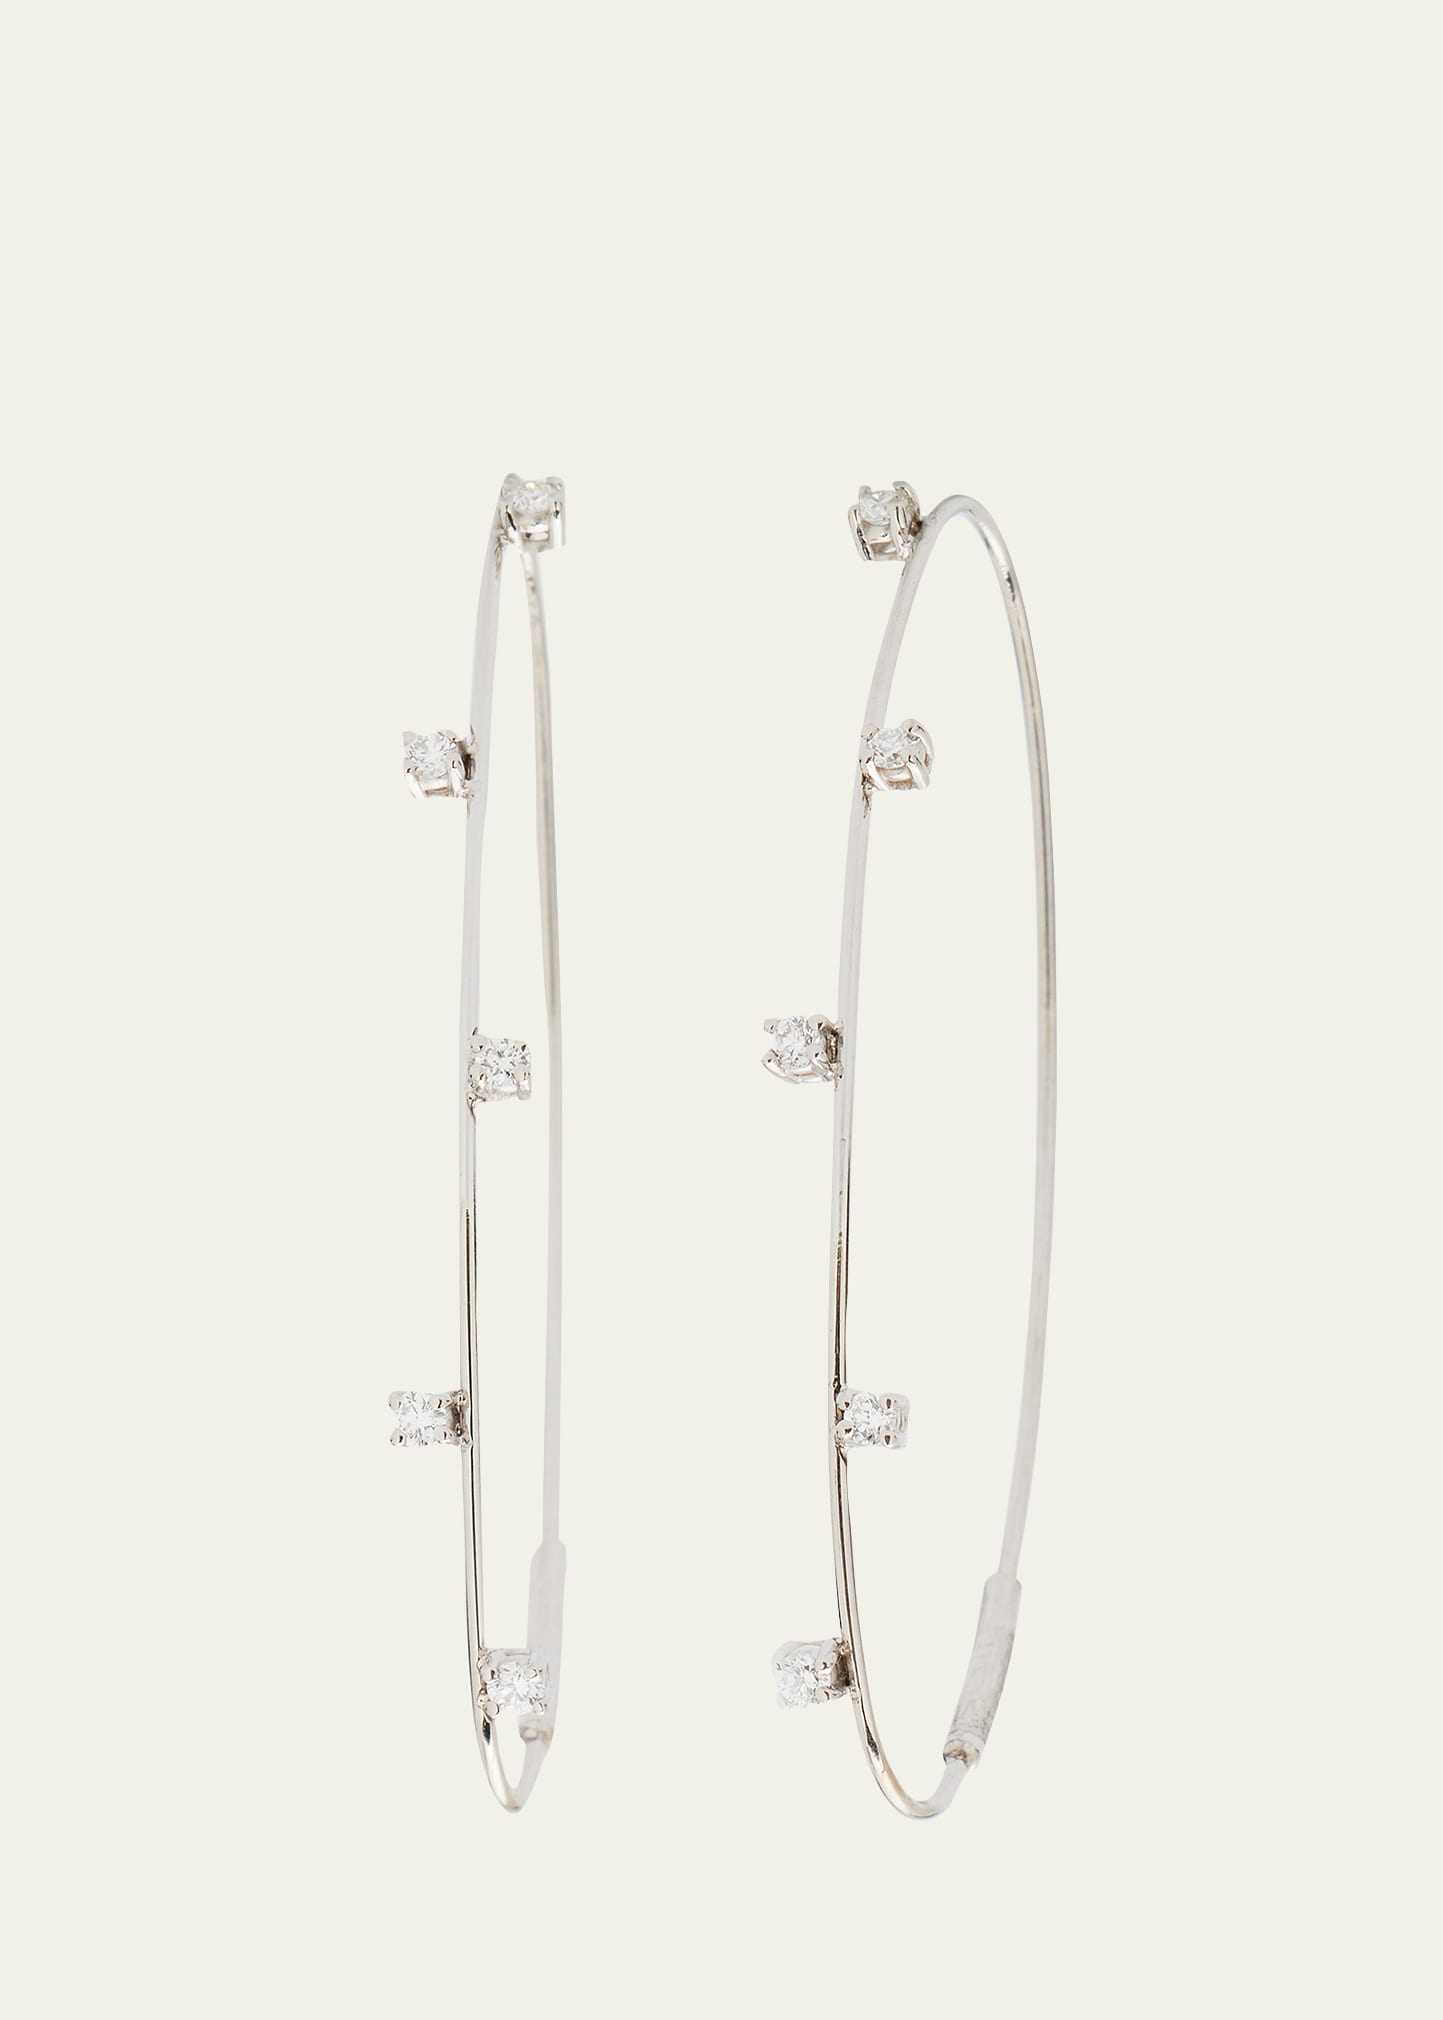 LANA Small Solo Wire Oval Magic Hoop Earrings with Diamonds, 43mm